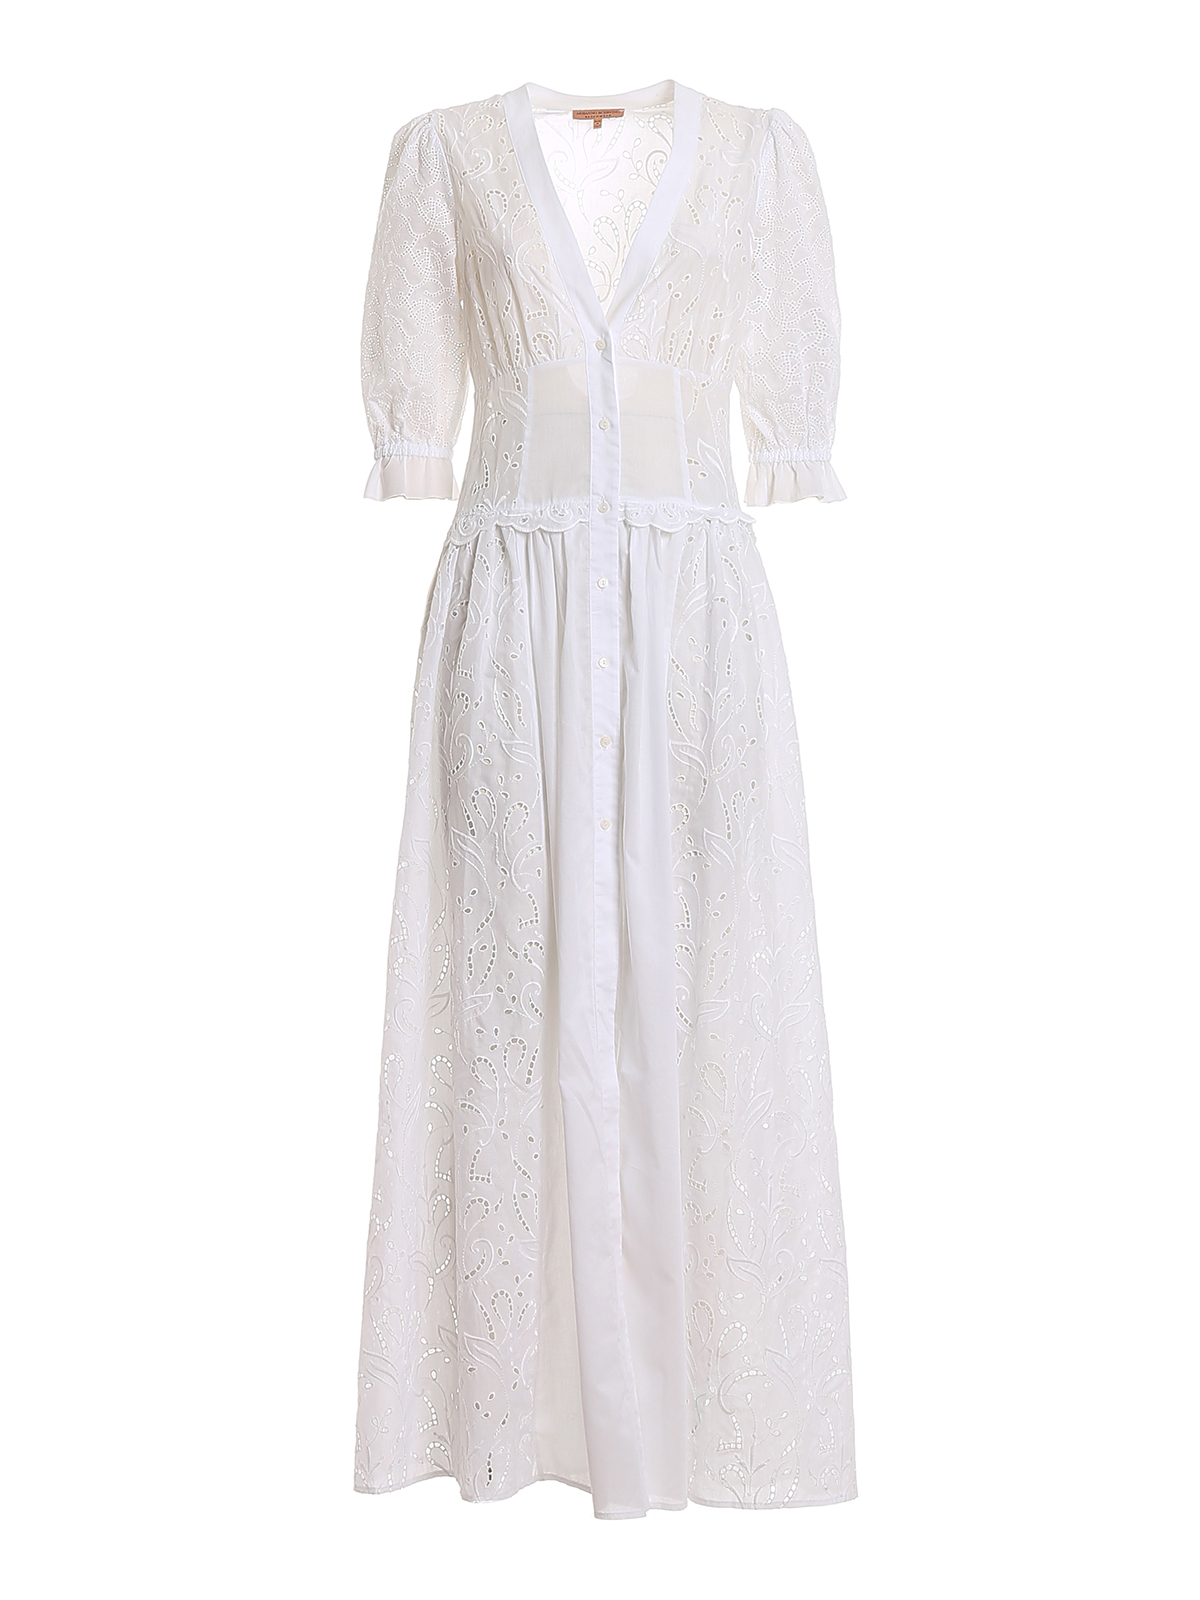 ERMANNO SCERVINO BRODERIE ANGLAISE MAXI DRESS